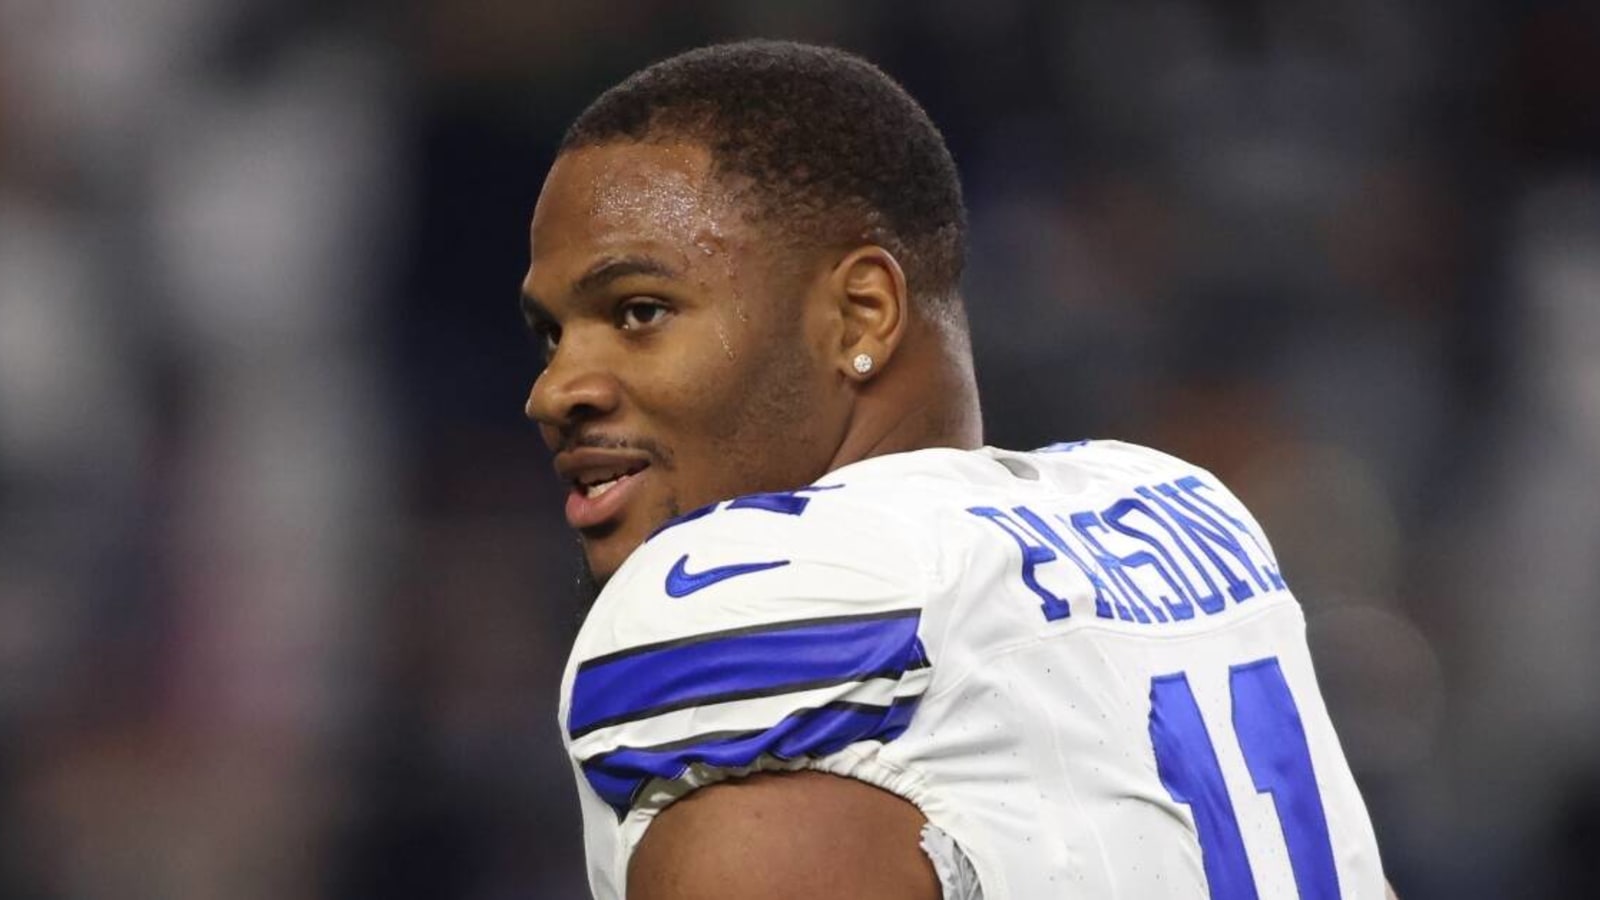 Micah Parsons added to Cowboys injury report with illness ahead of SNF vs Eagles